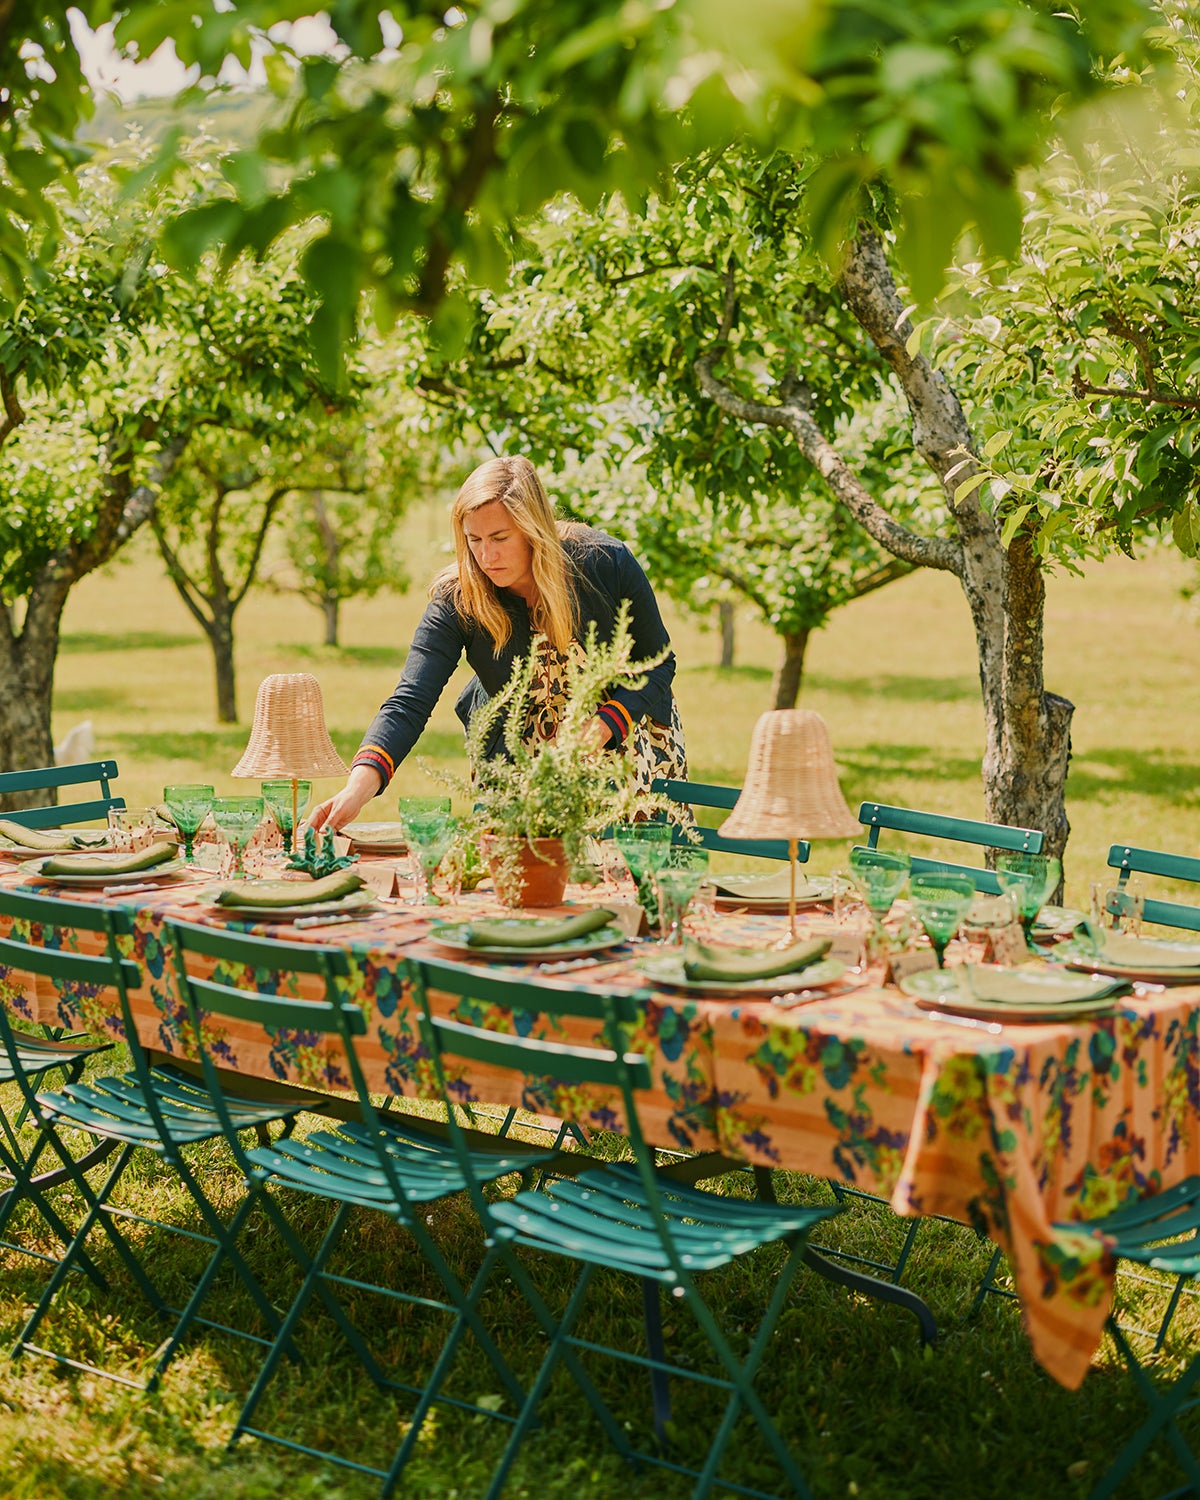 Woman setting up an outdoor table in a field